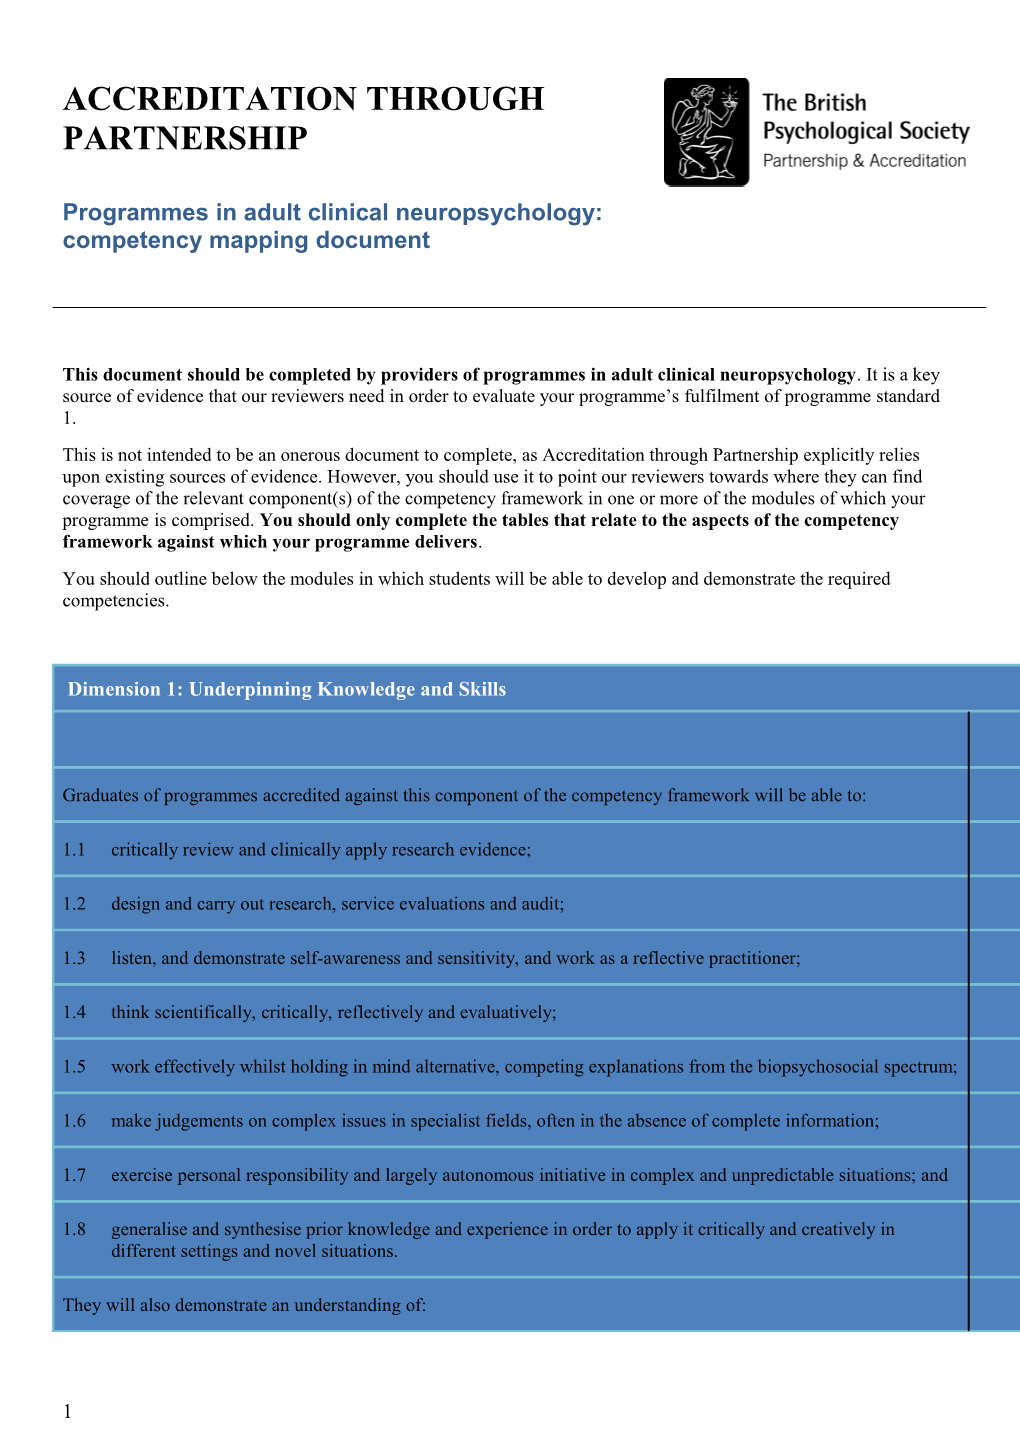 Programmes in Adult Clinical Neuropsychology: Competencymapping Document